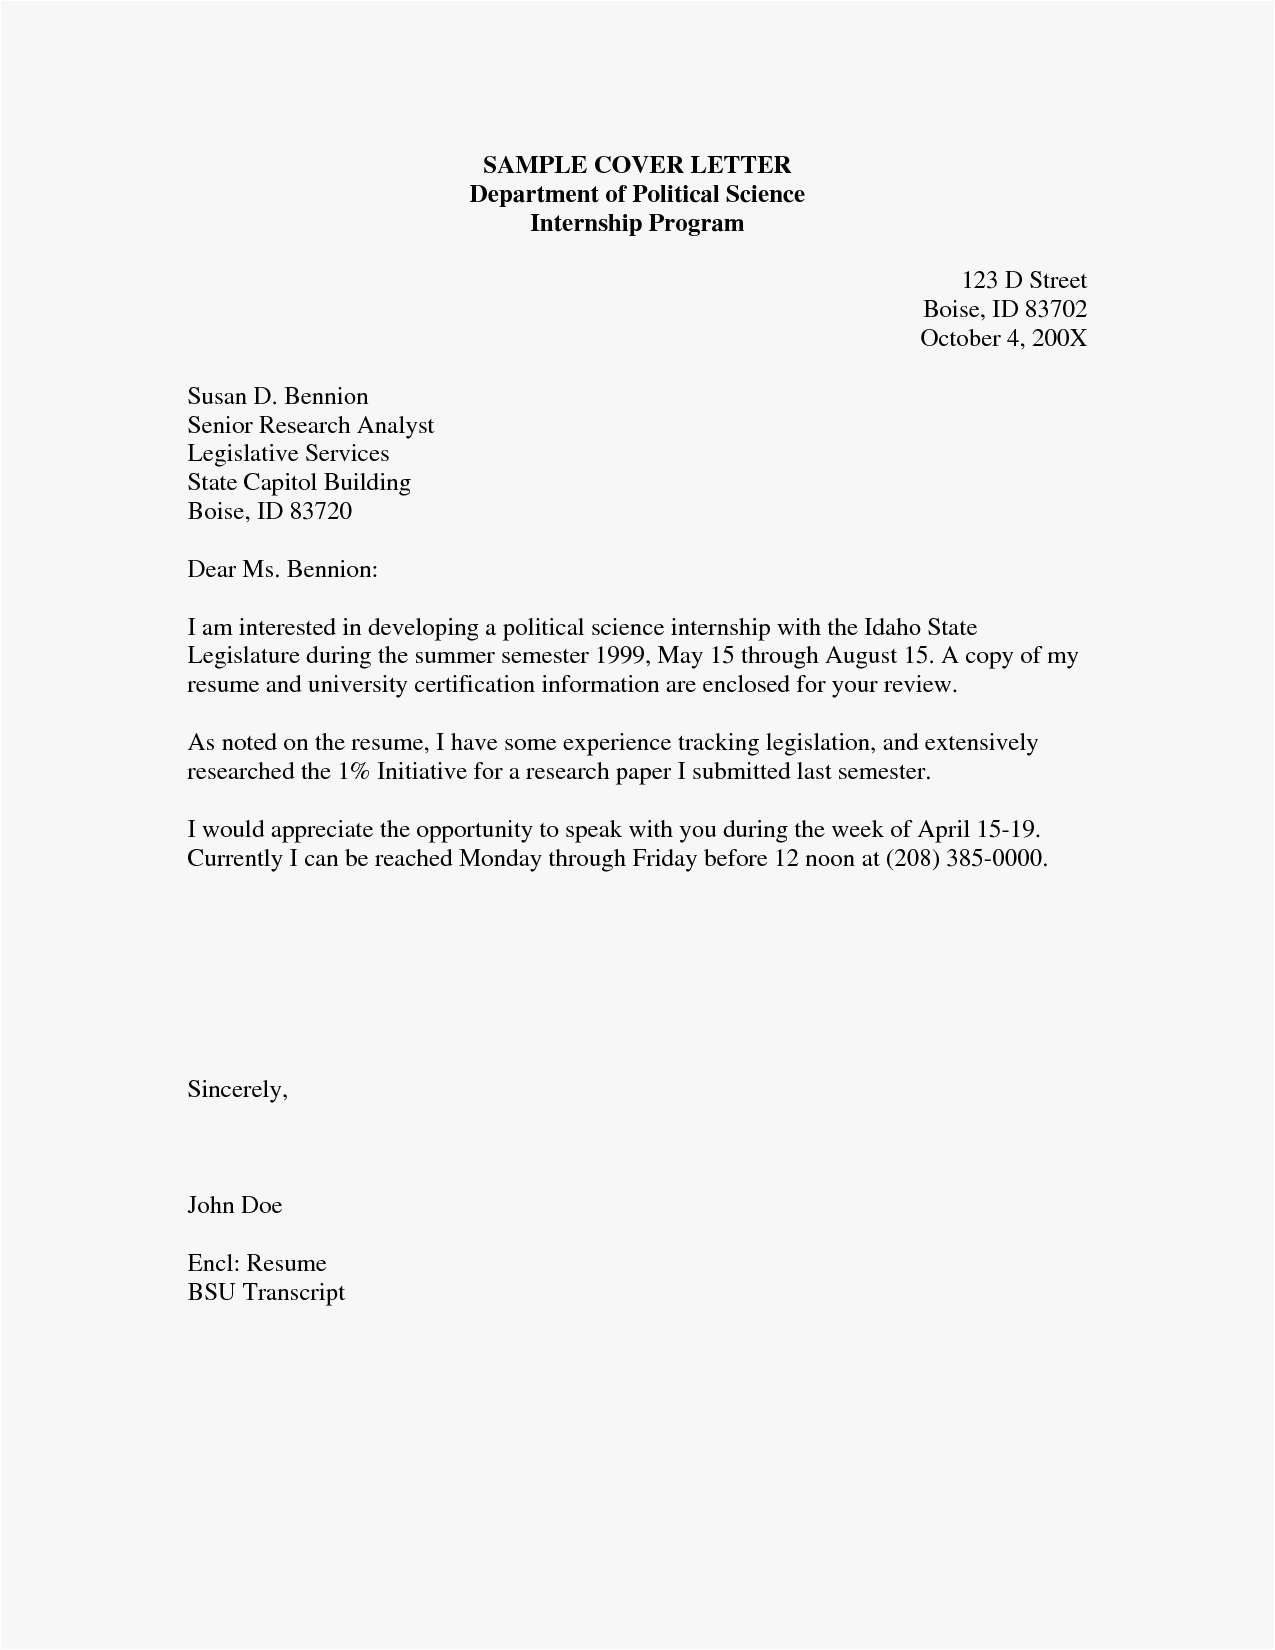 Sample Cover Letter For Students Applying For An Internship With No Experience